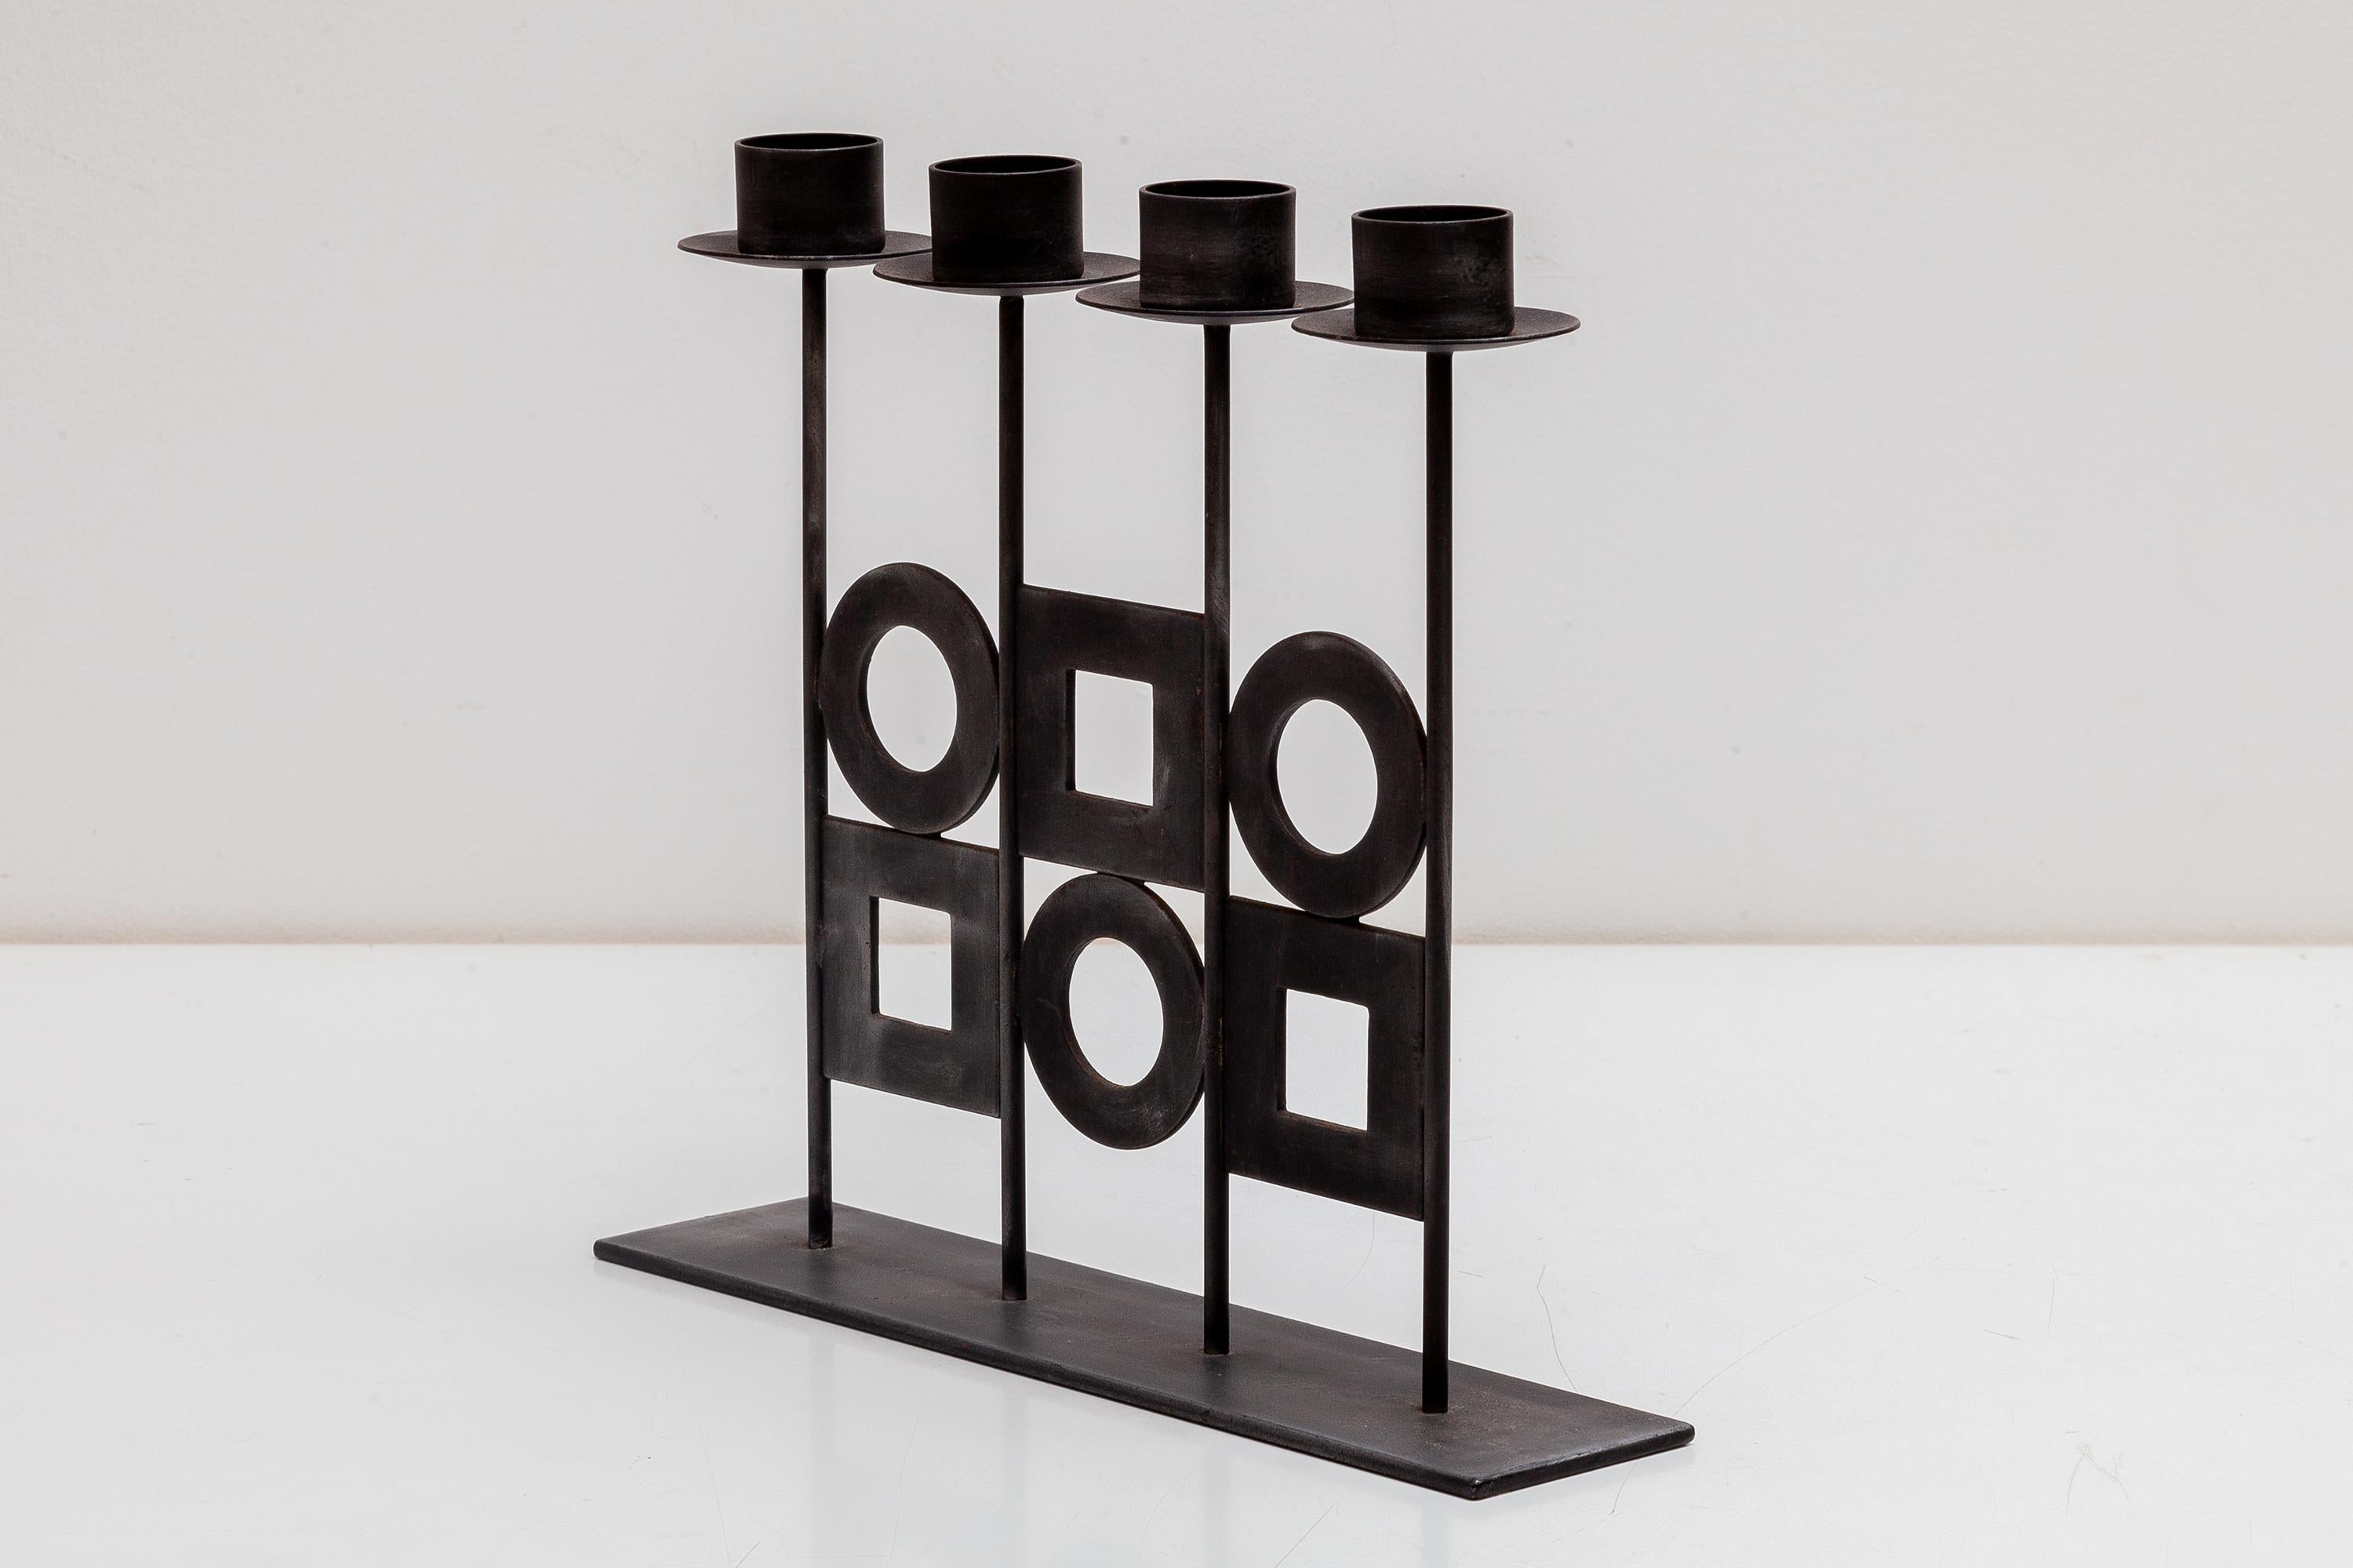 Vintage modernist candelabra, 1960s. Geometric iron and metal work. Holds 4 candles. Dimensions: 26W x 23H x 6D cm.Labeled Made in Austria.